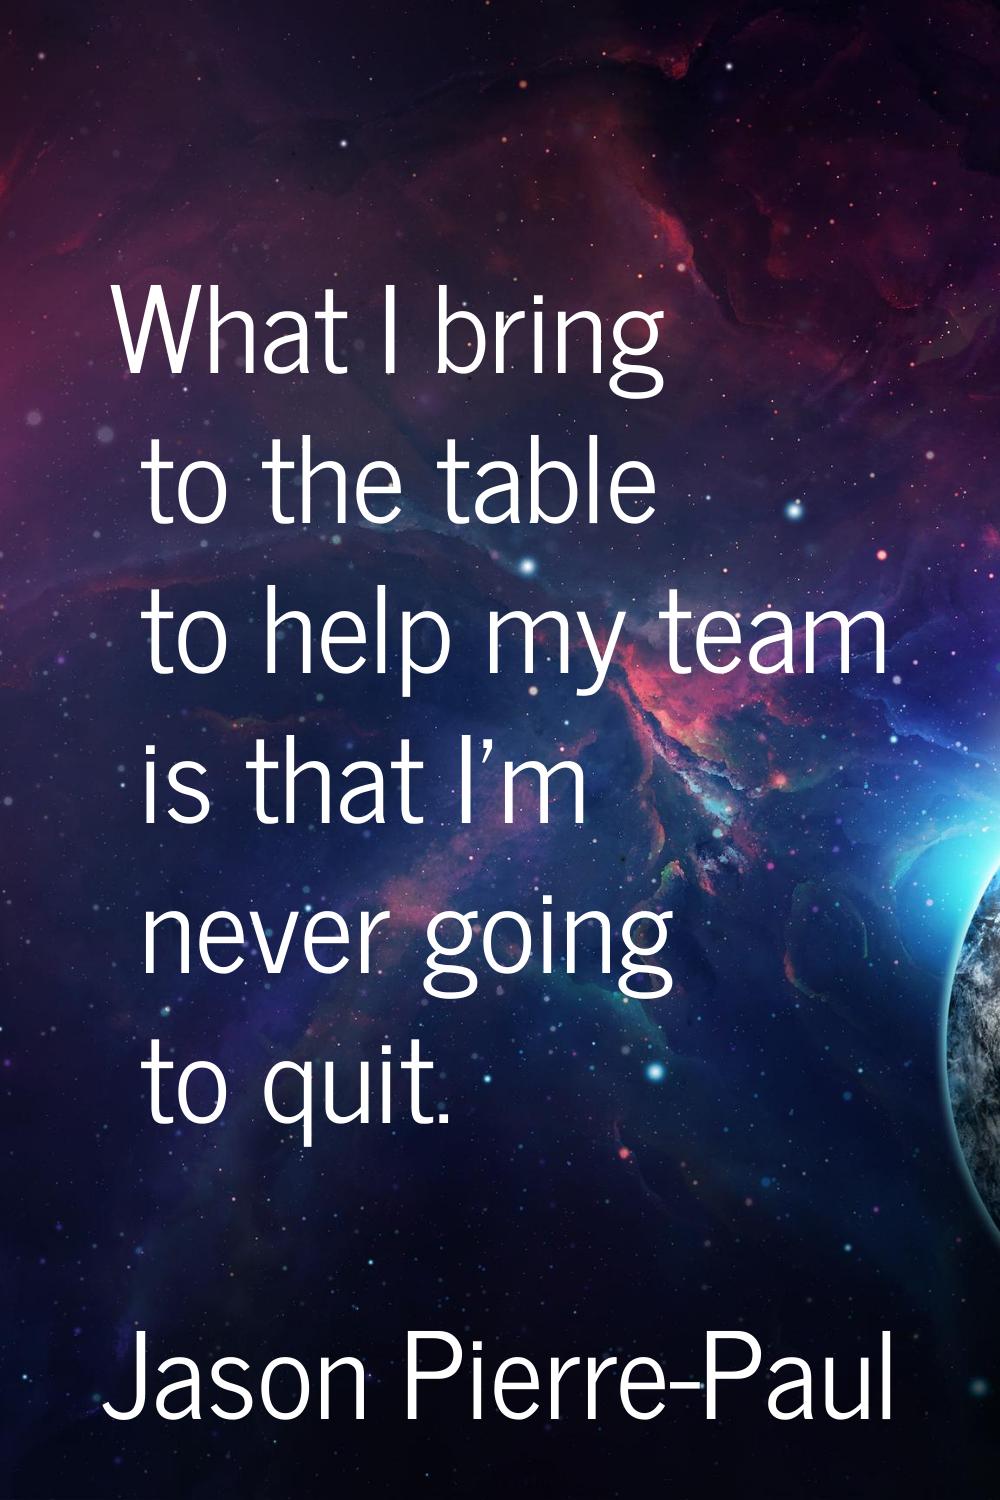 What I bring to the table to help my team is that I'm never going to quit.